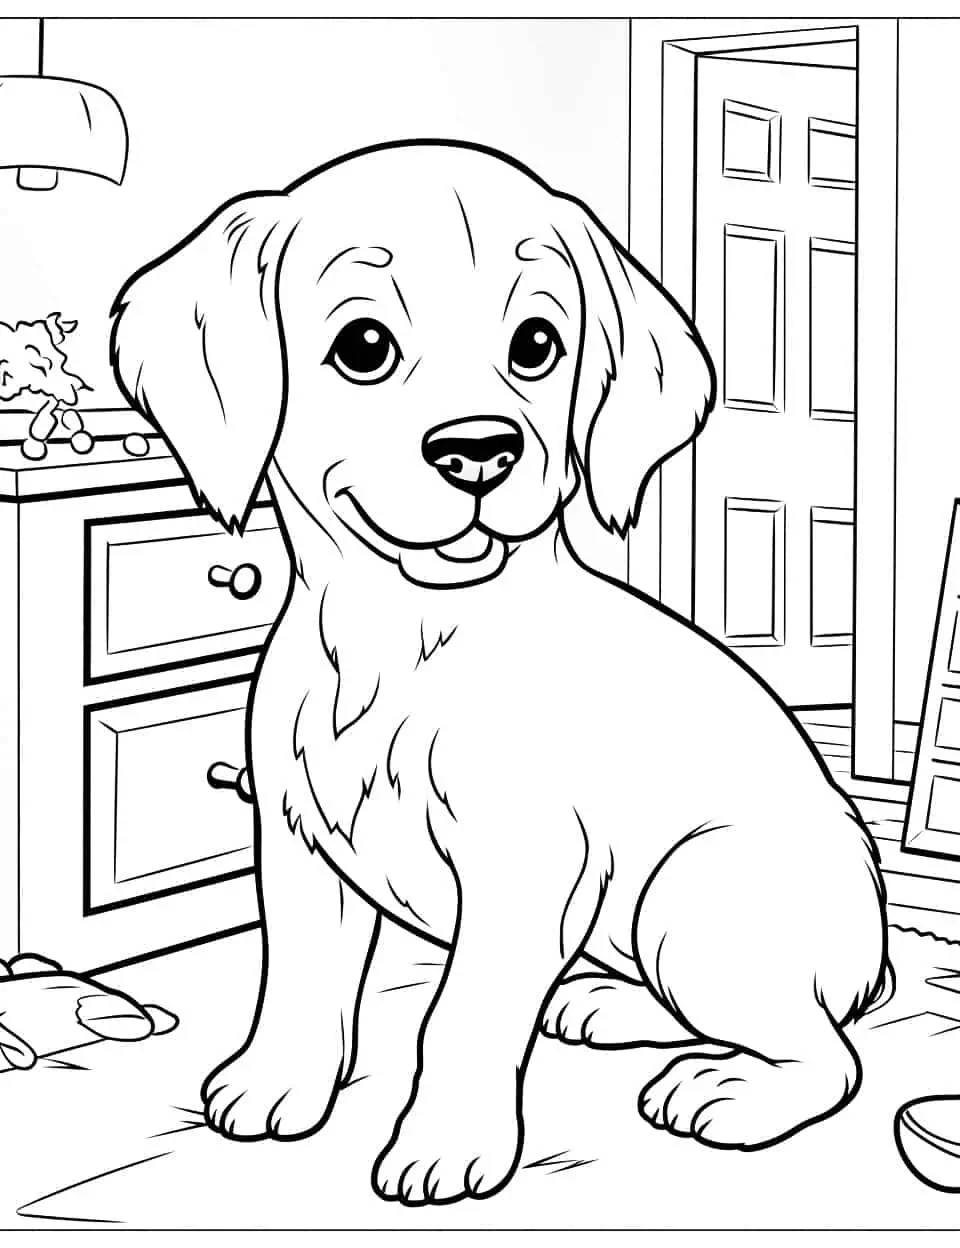 Life of a Golden Retriever Coloring Page - A Golden Retriever, sitting on the floor waiting for his owner to come home.